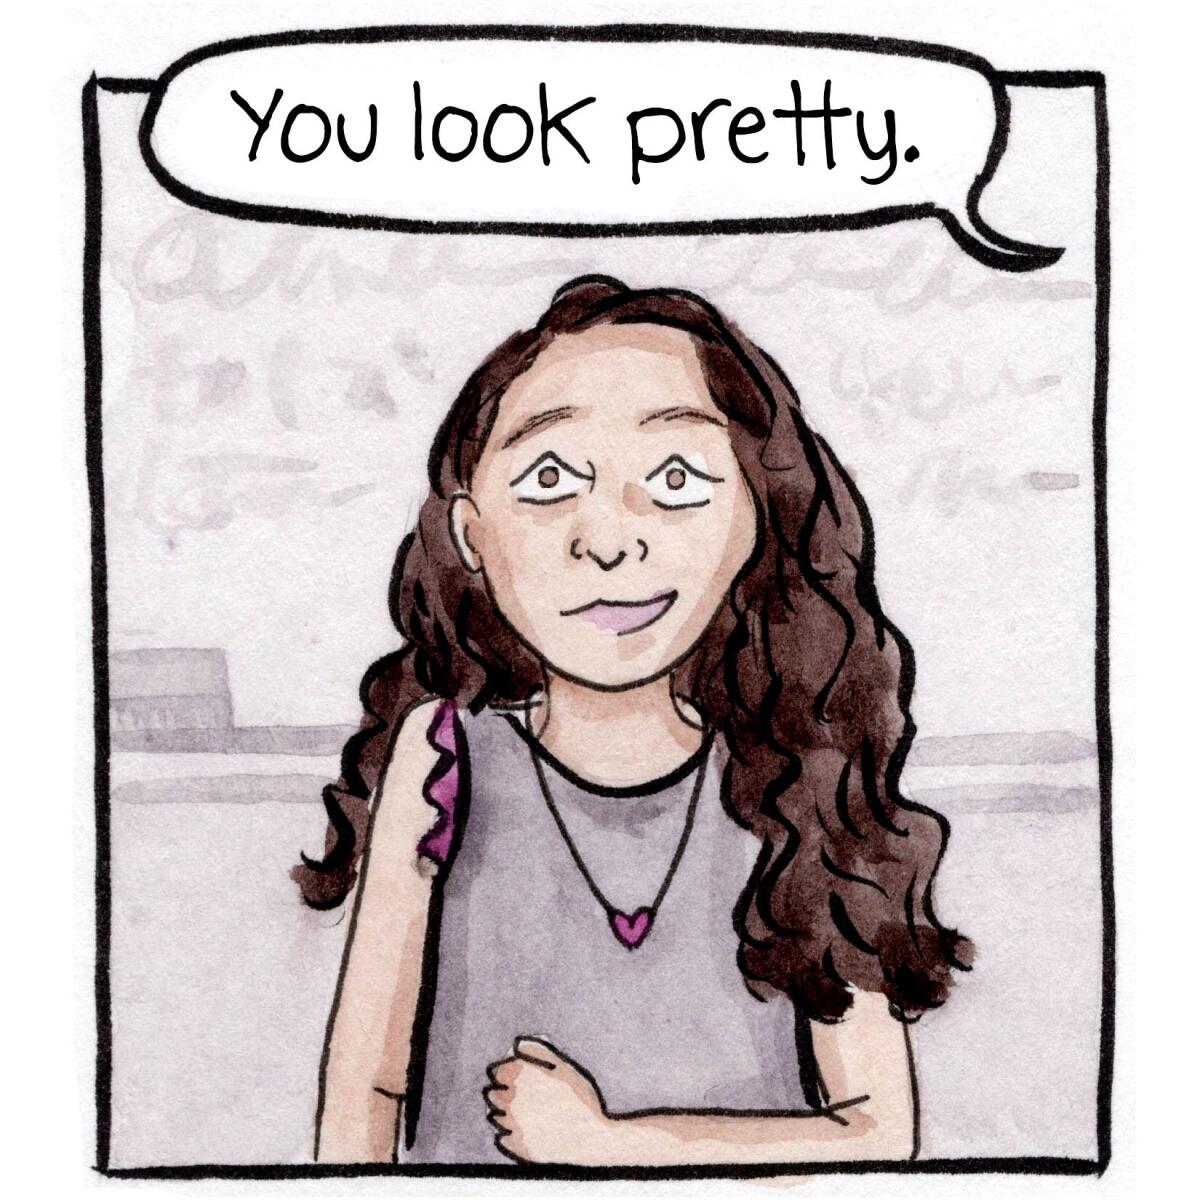 Someone says, "You look beautiful," to a teenager wearing a ruffled tank top and long, wavy hair.